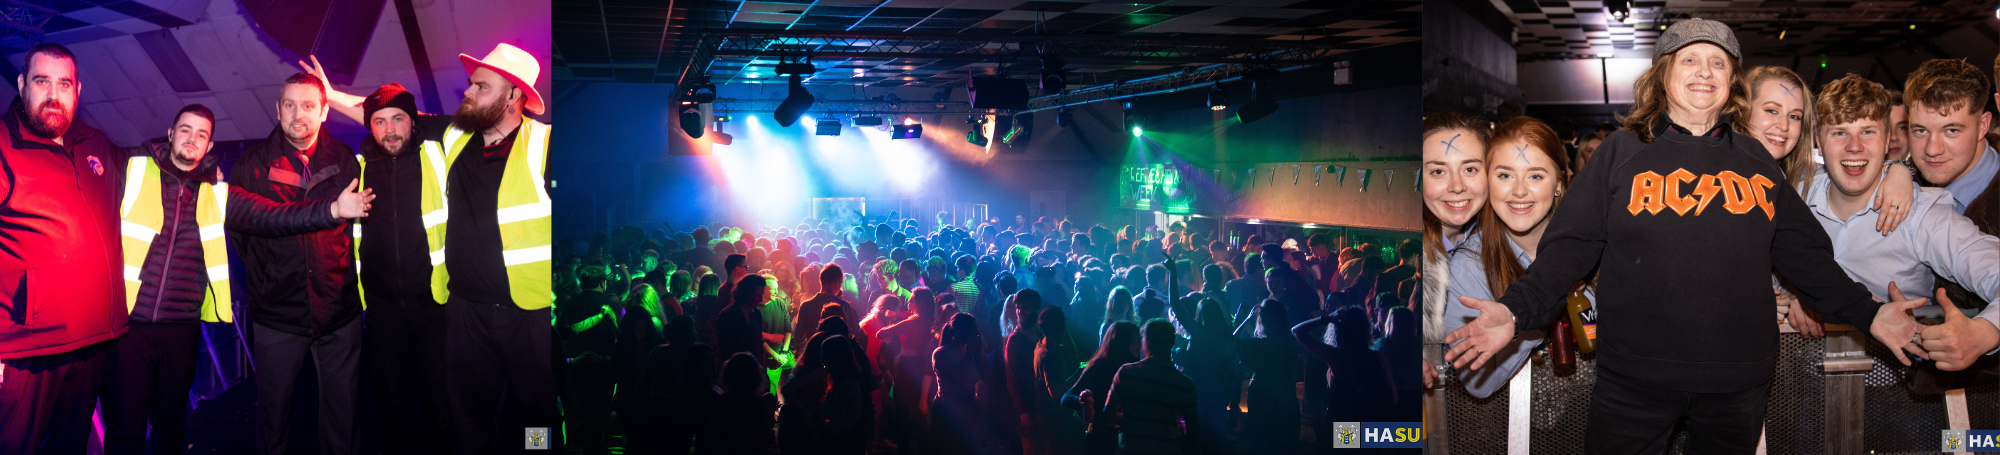 On campus we have our two main venues for all of our student nights and events. We have The Welly, which is our student pub and The Barn which hosts our weekly student club night, FLOCK and alongside all our major events.
Take a look at their pages to find out more about what’s on!